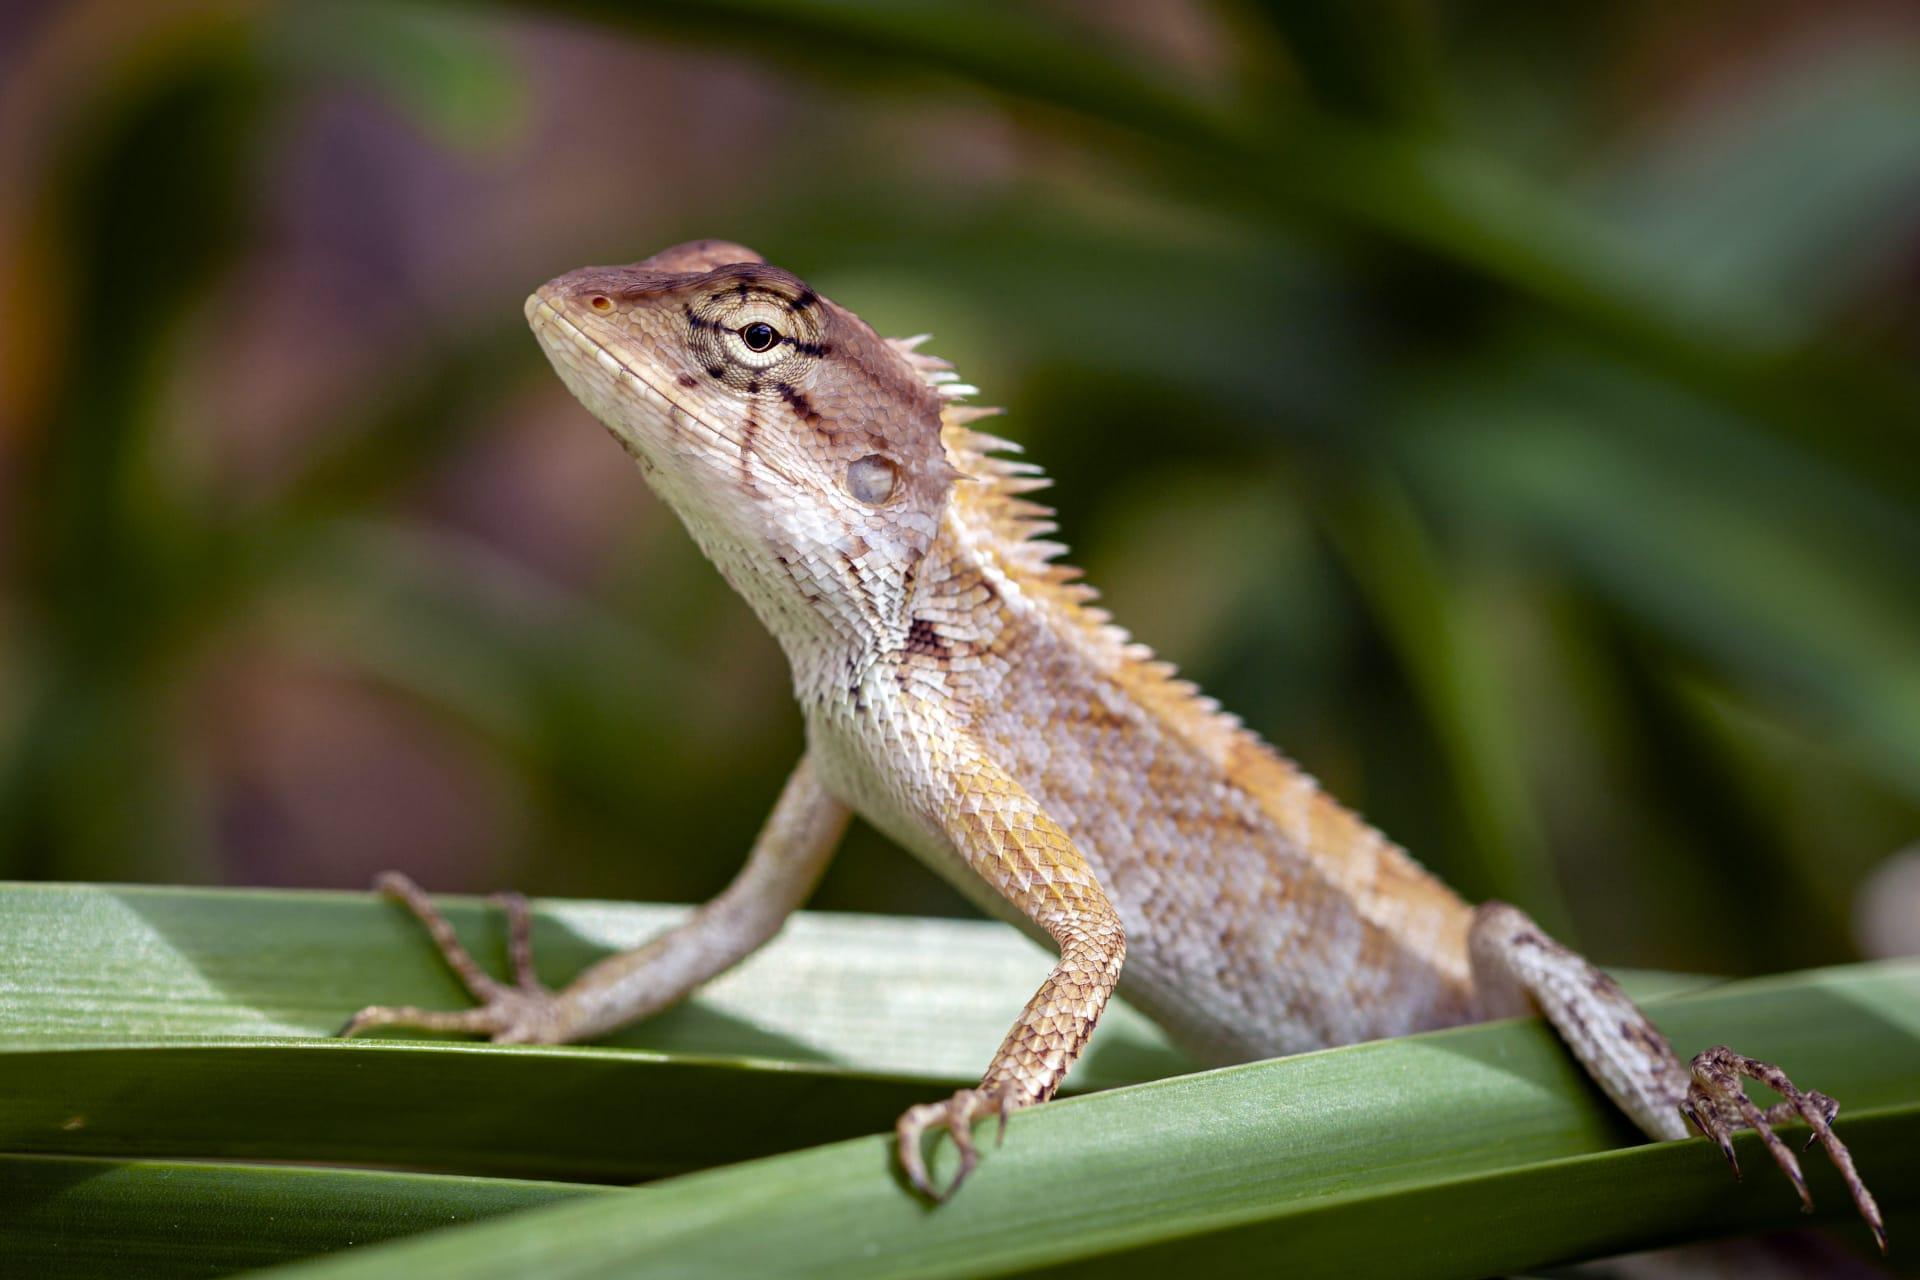 Dragon lizard pictures